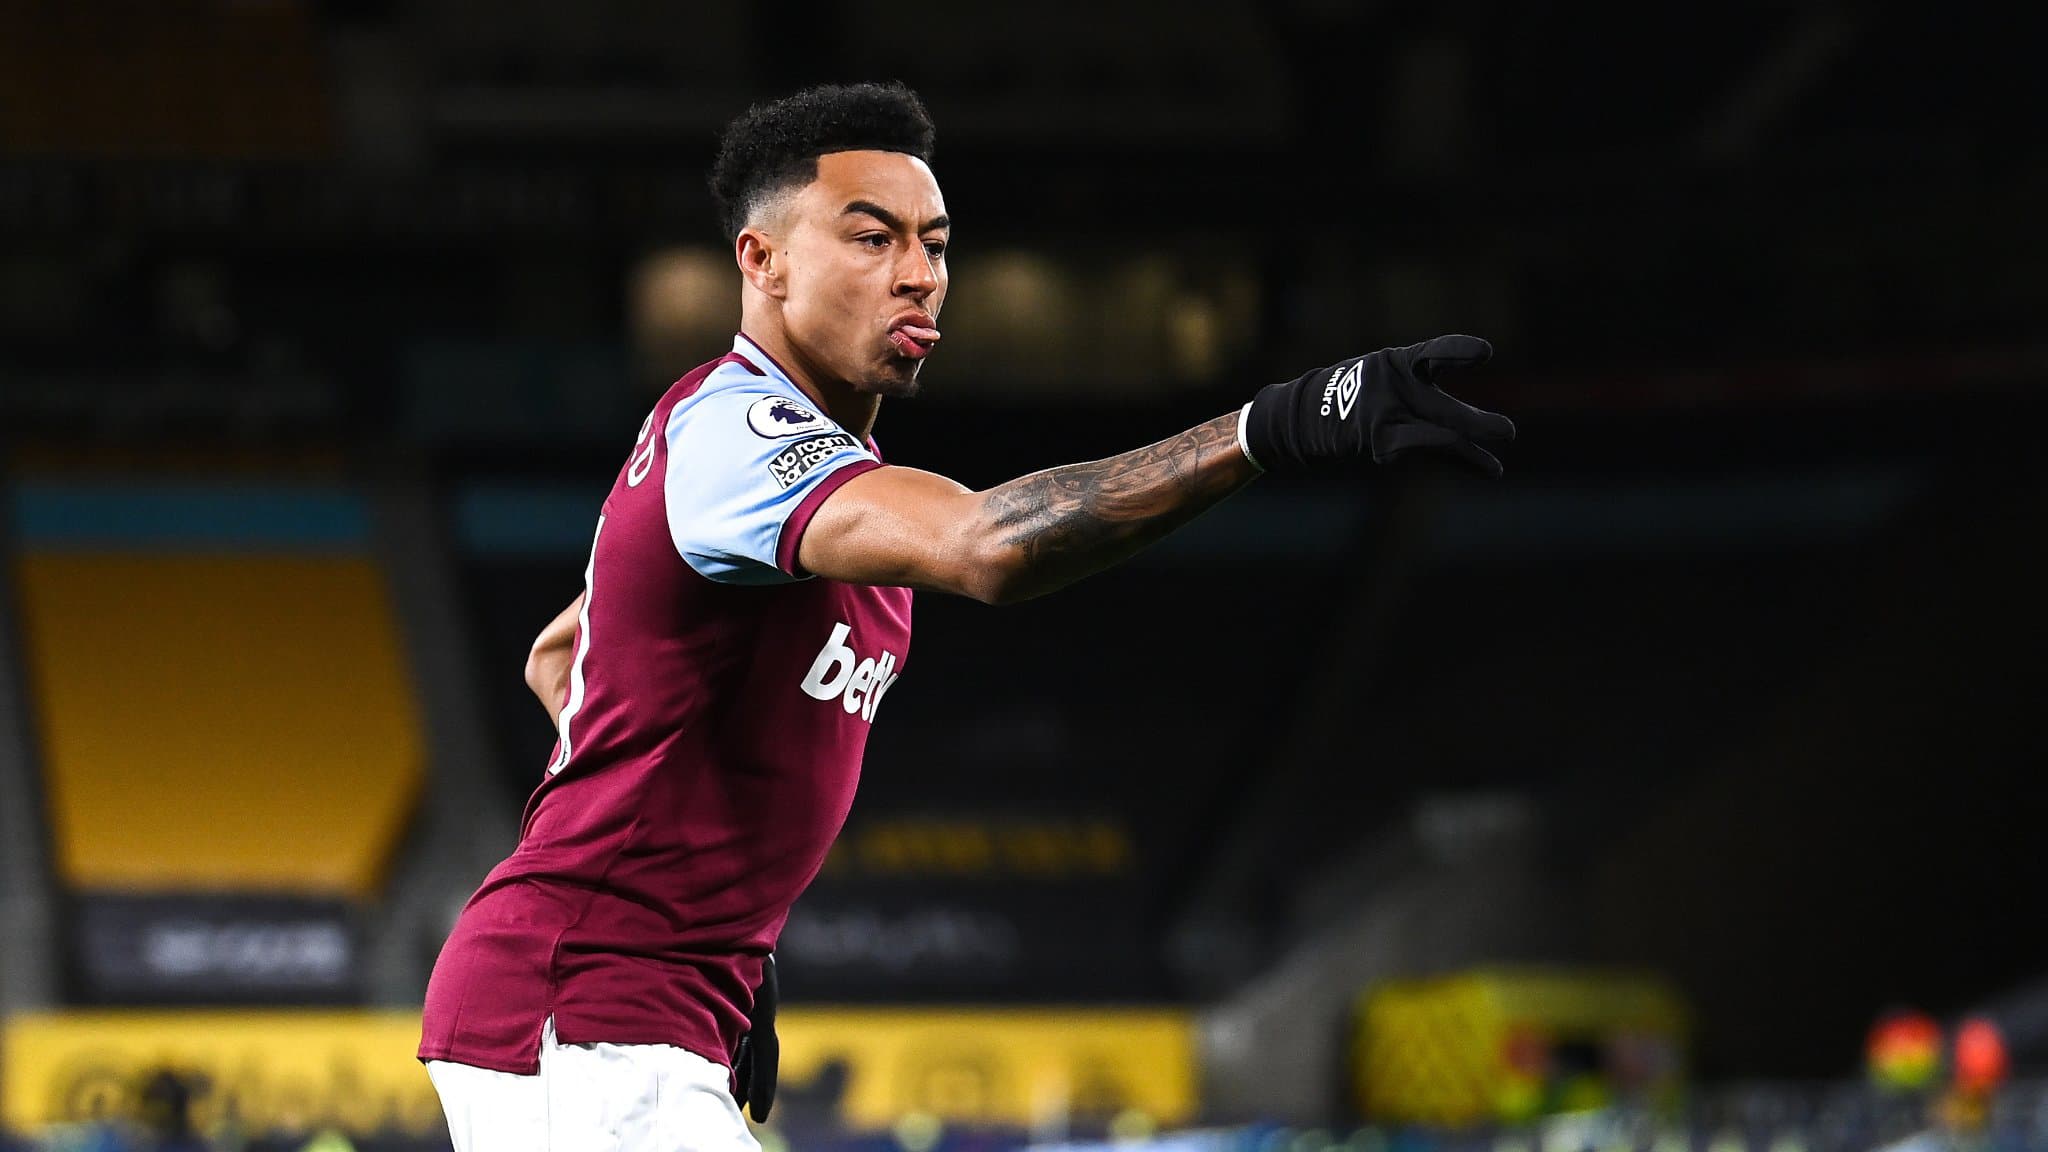 Wolves West Ham: The Lingard Festival, With A Sumptuous Solitary Raid. The Indian Paper